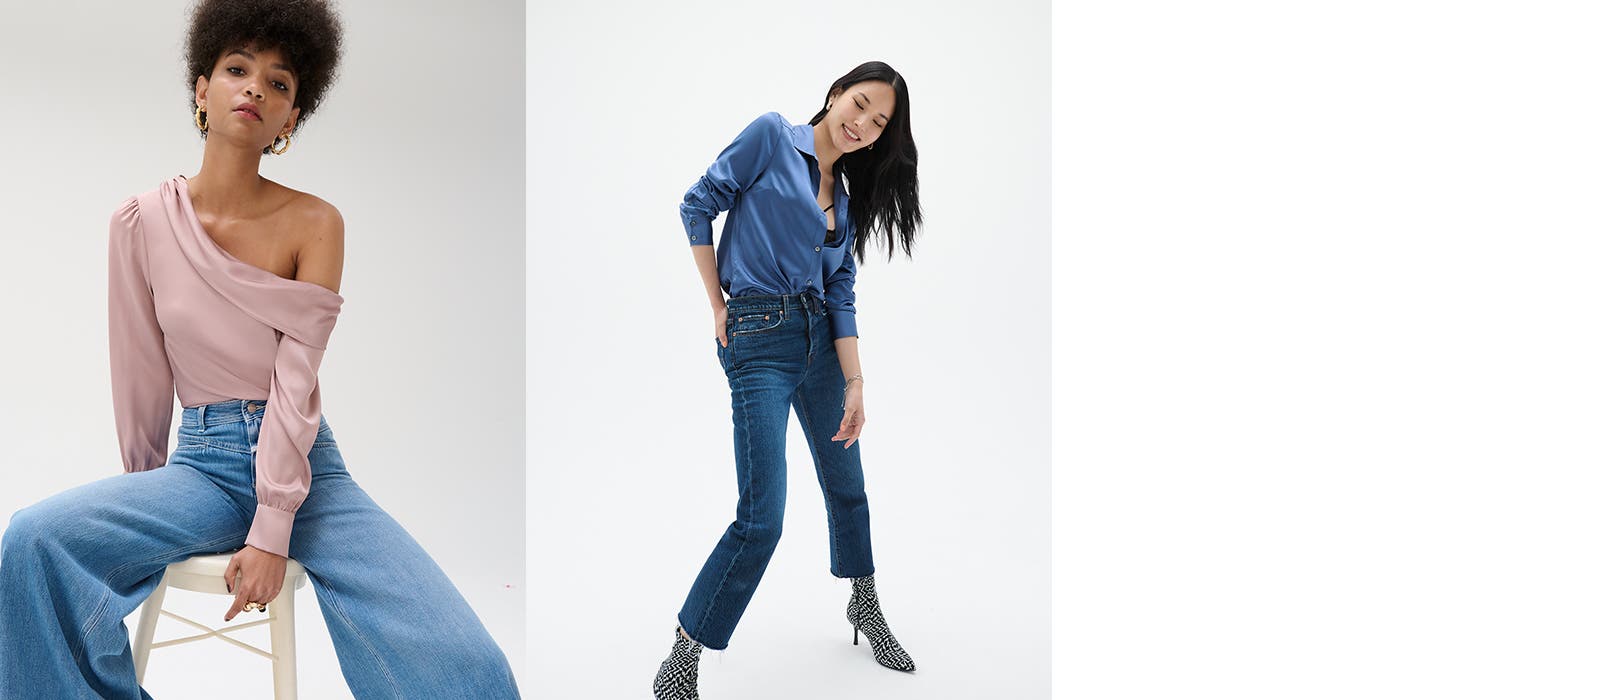 A model in wide-leg jeans and a pink top. A model in straight-leg jeans and a blue top.